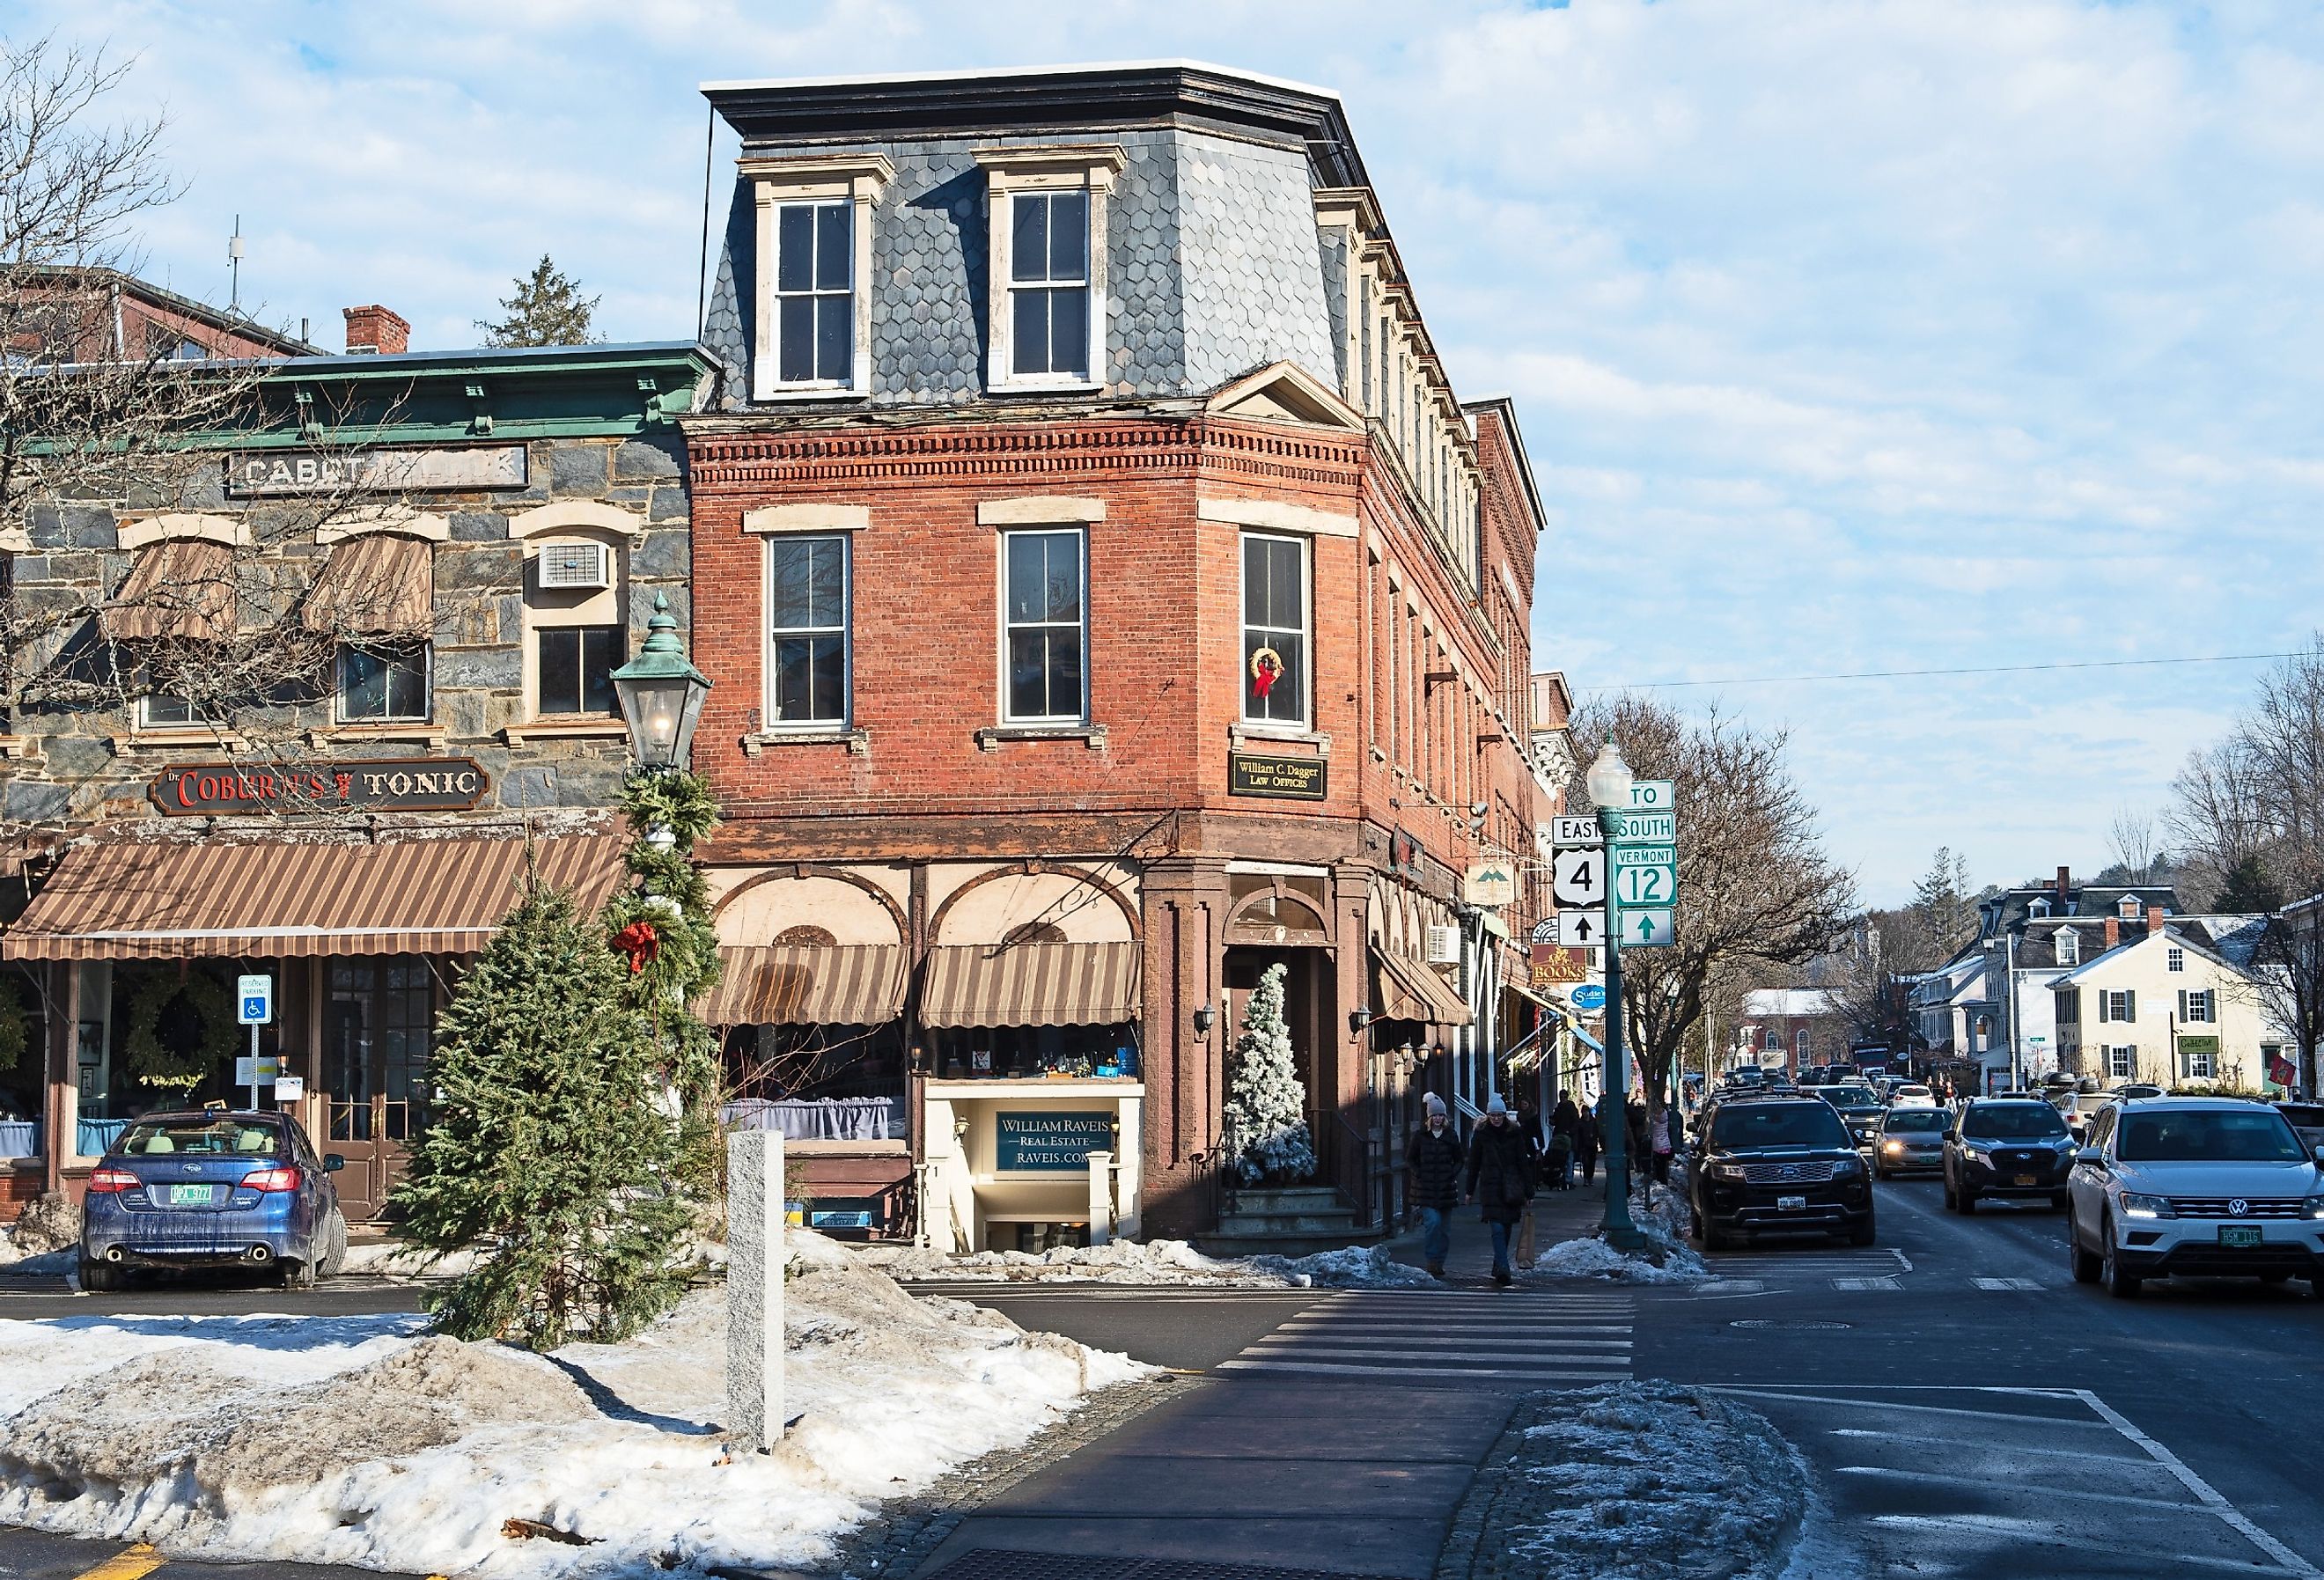 Downtown street in Woodstock, Vermont. Image credit Mystic Stock Photography via Shutterstock